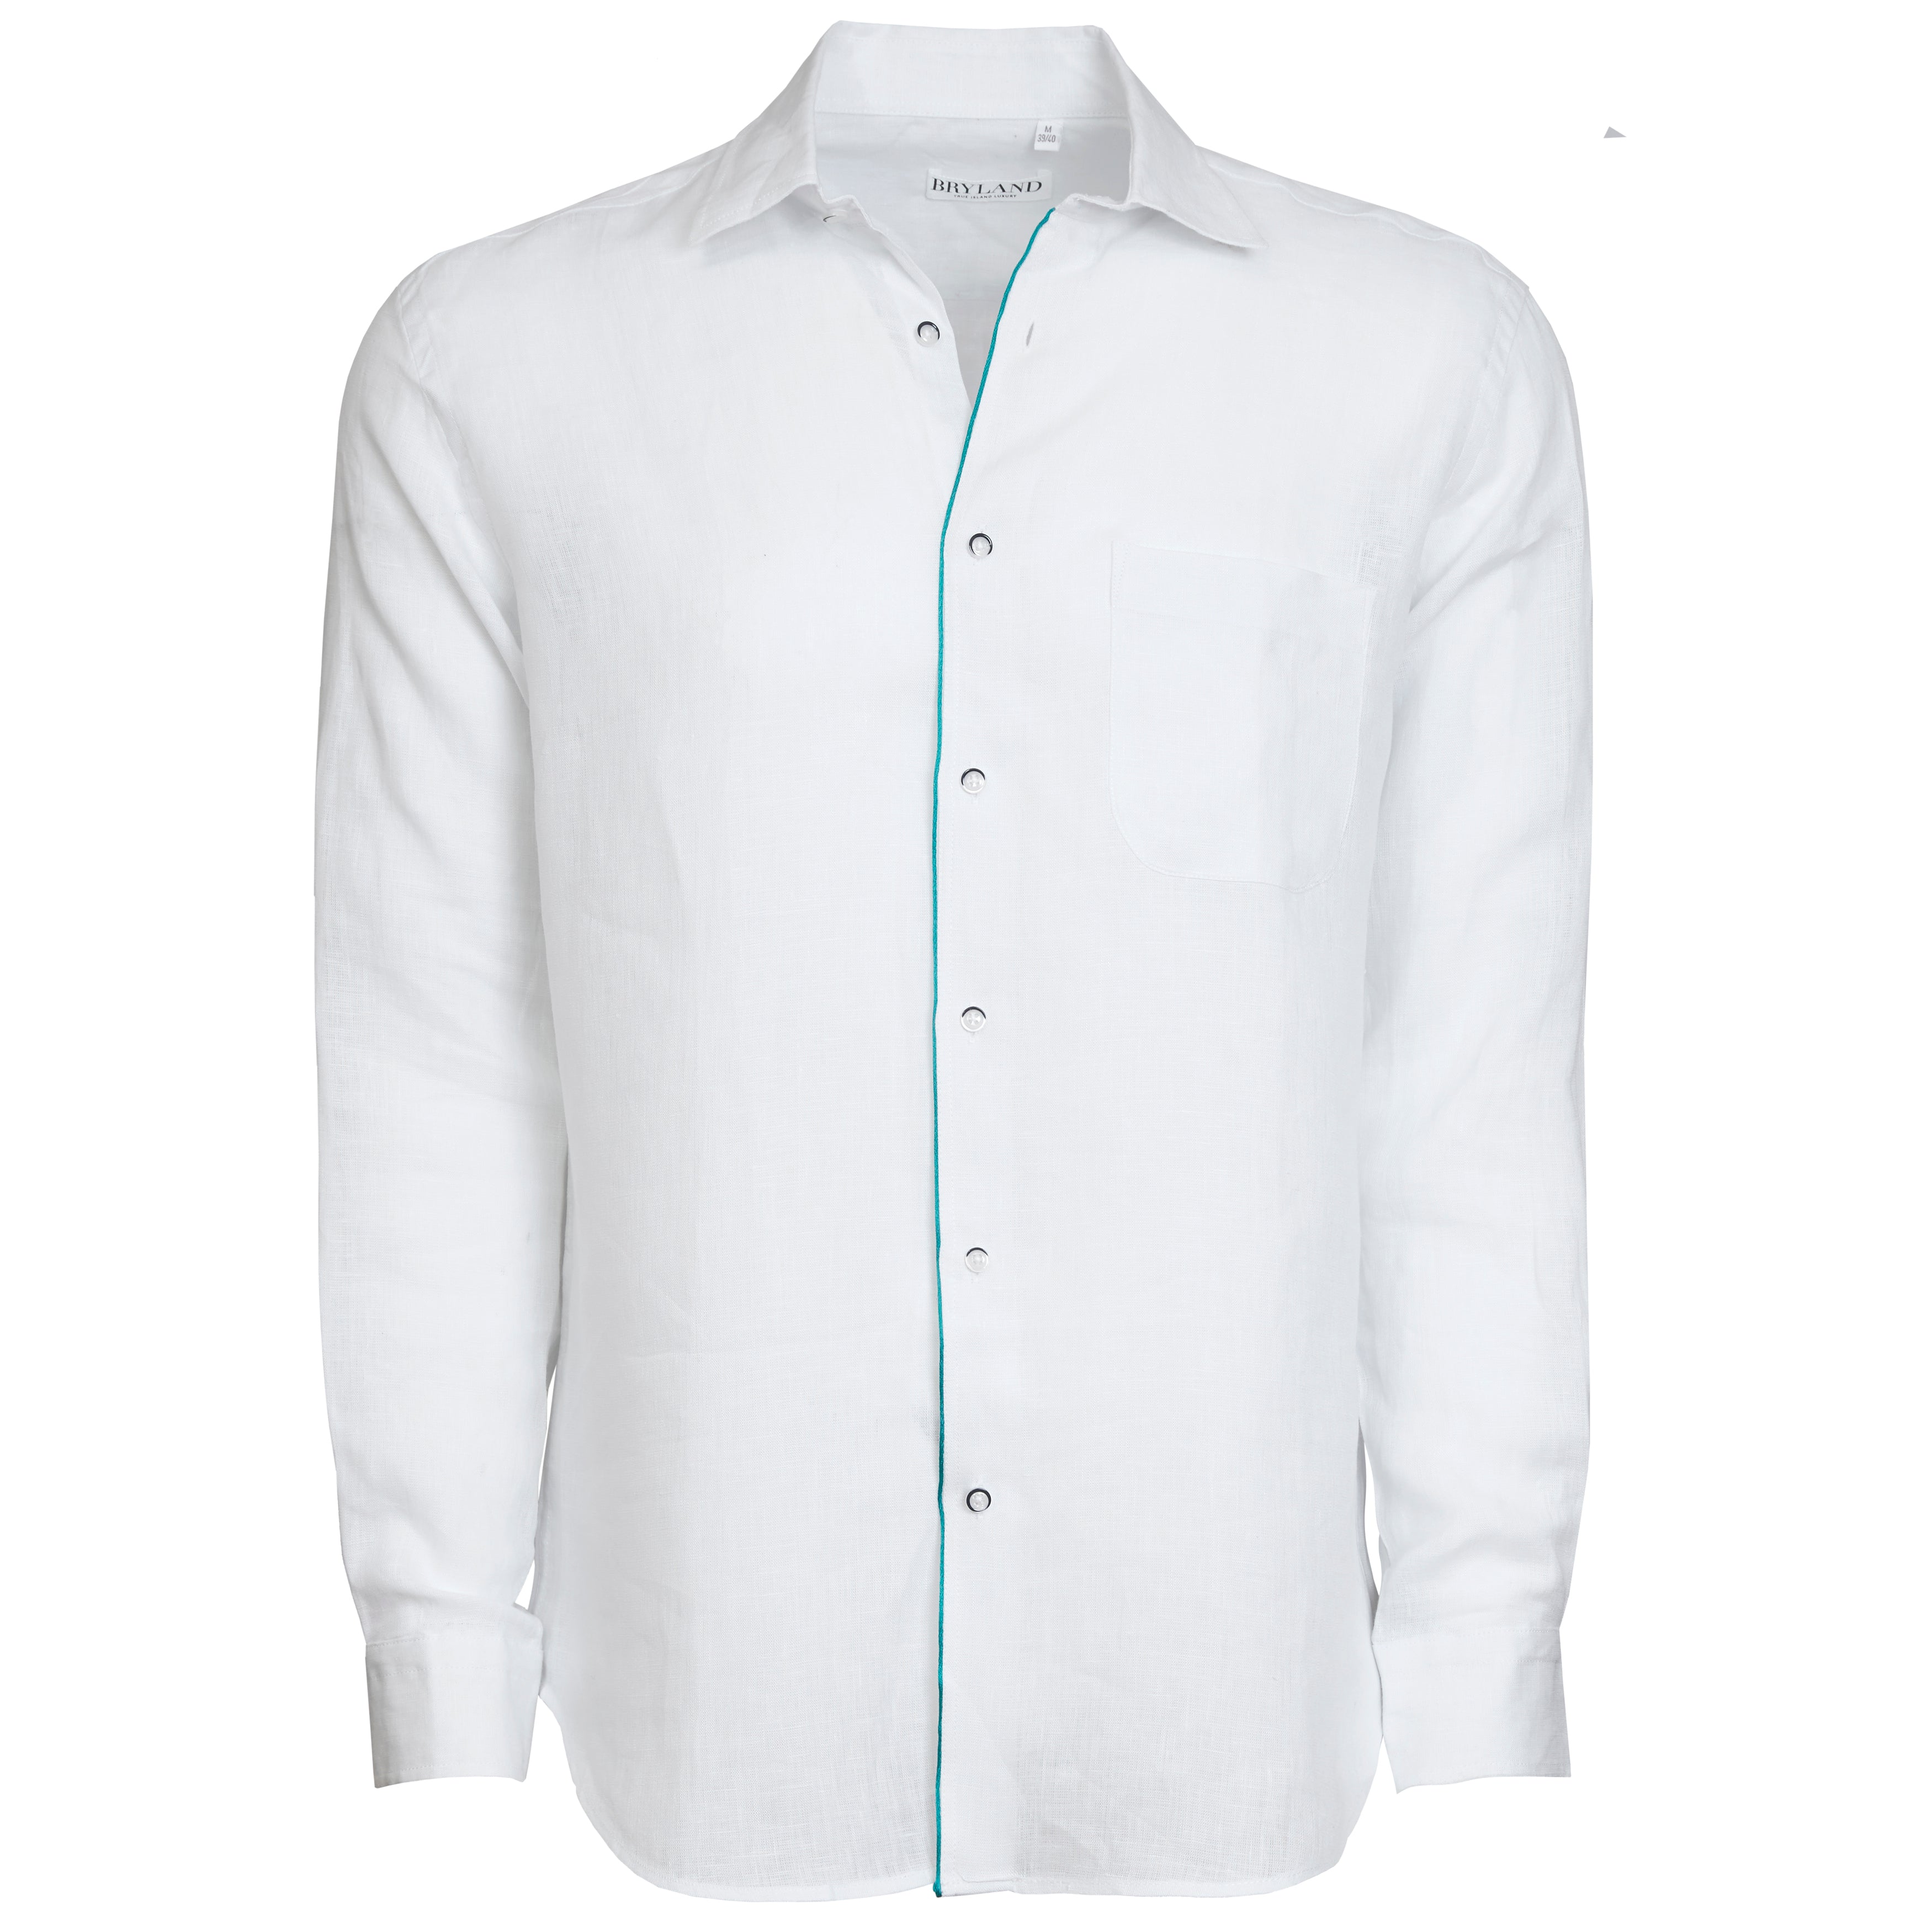 Limited Edition - Seaduction Linen Shirt - Sea Green